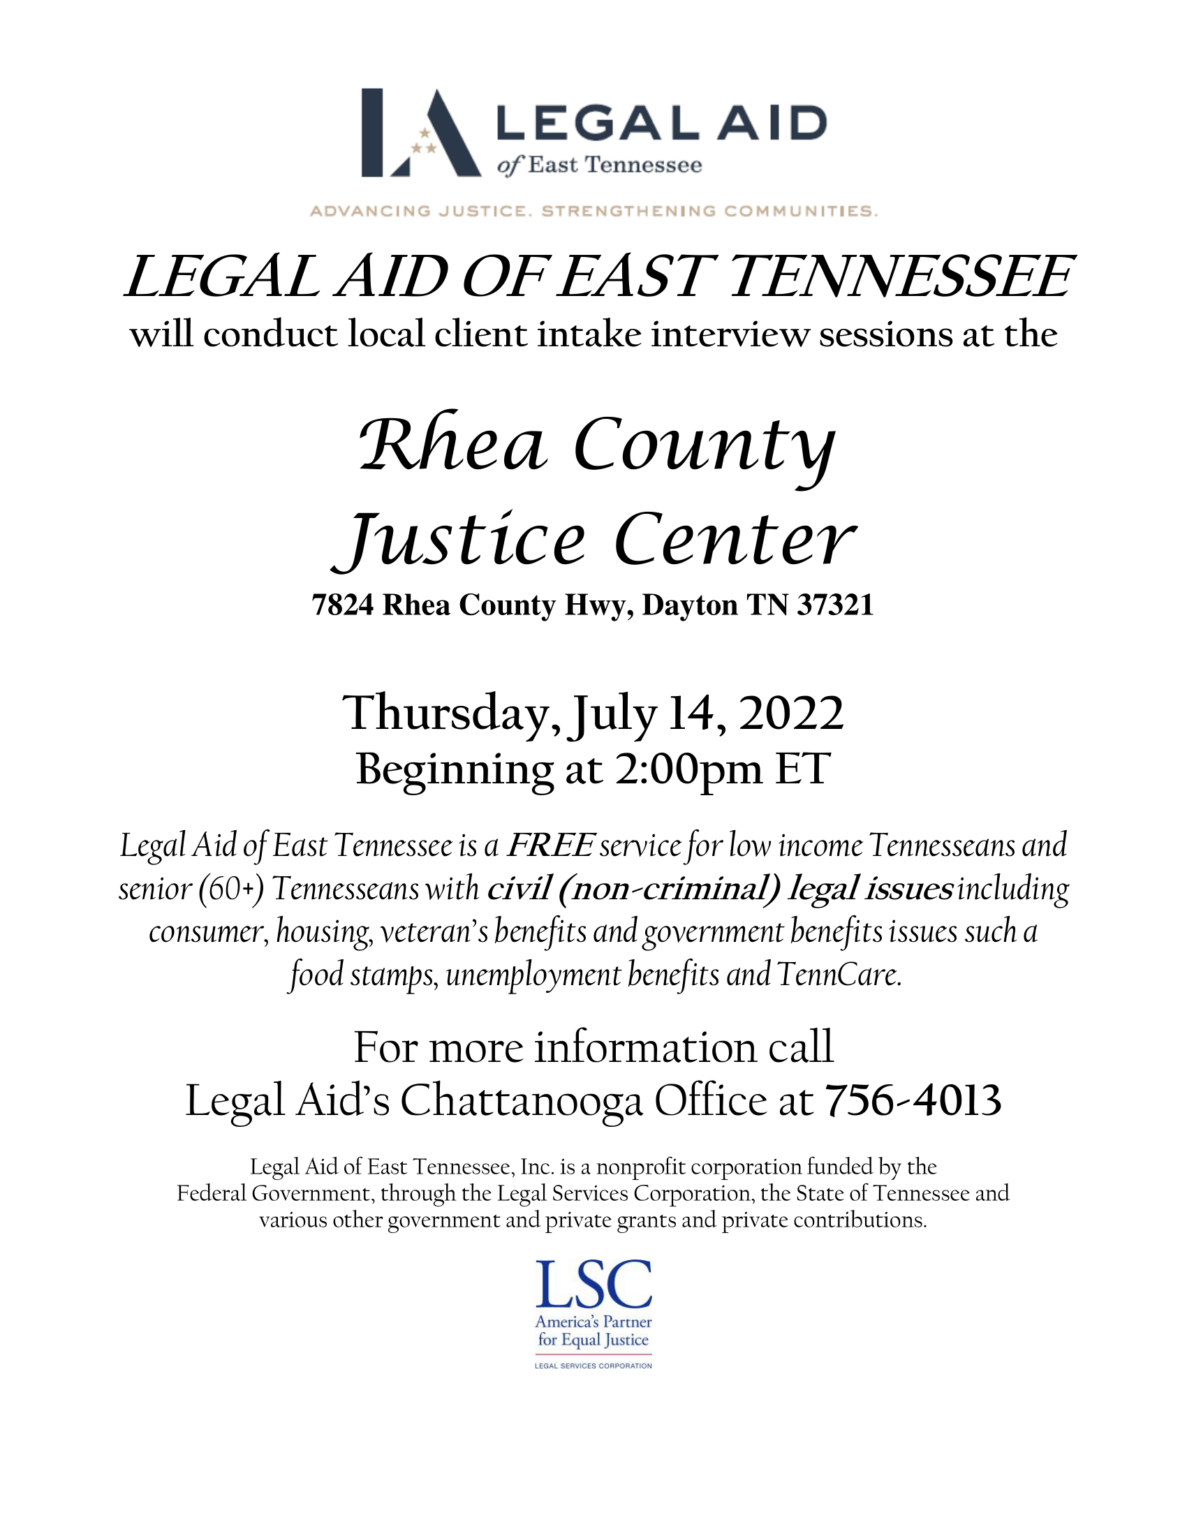 RHEA COUNTY INTAKE JUSTICE CENTER Legal Aid of East Tennessee